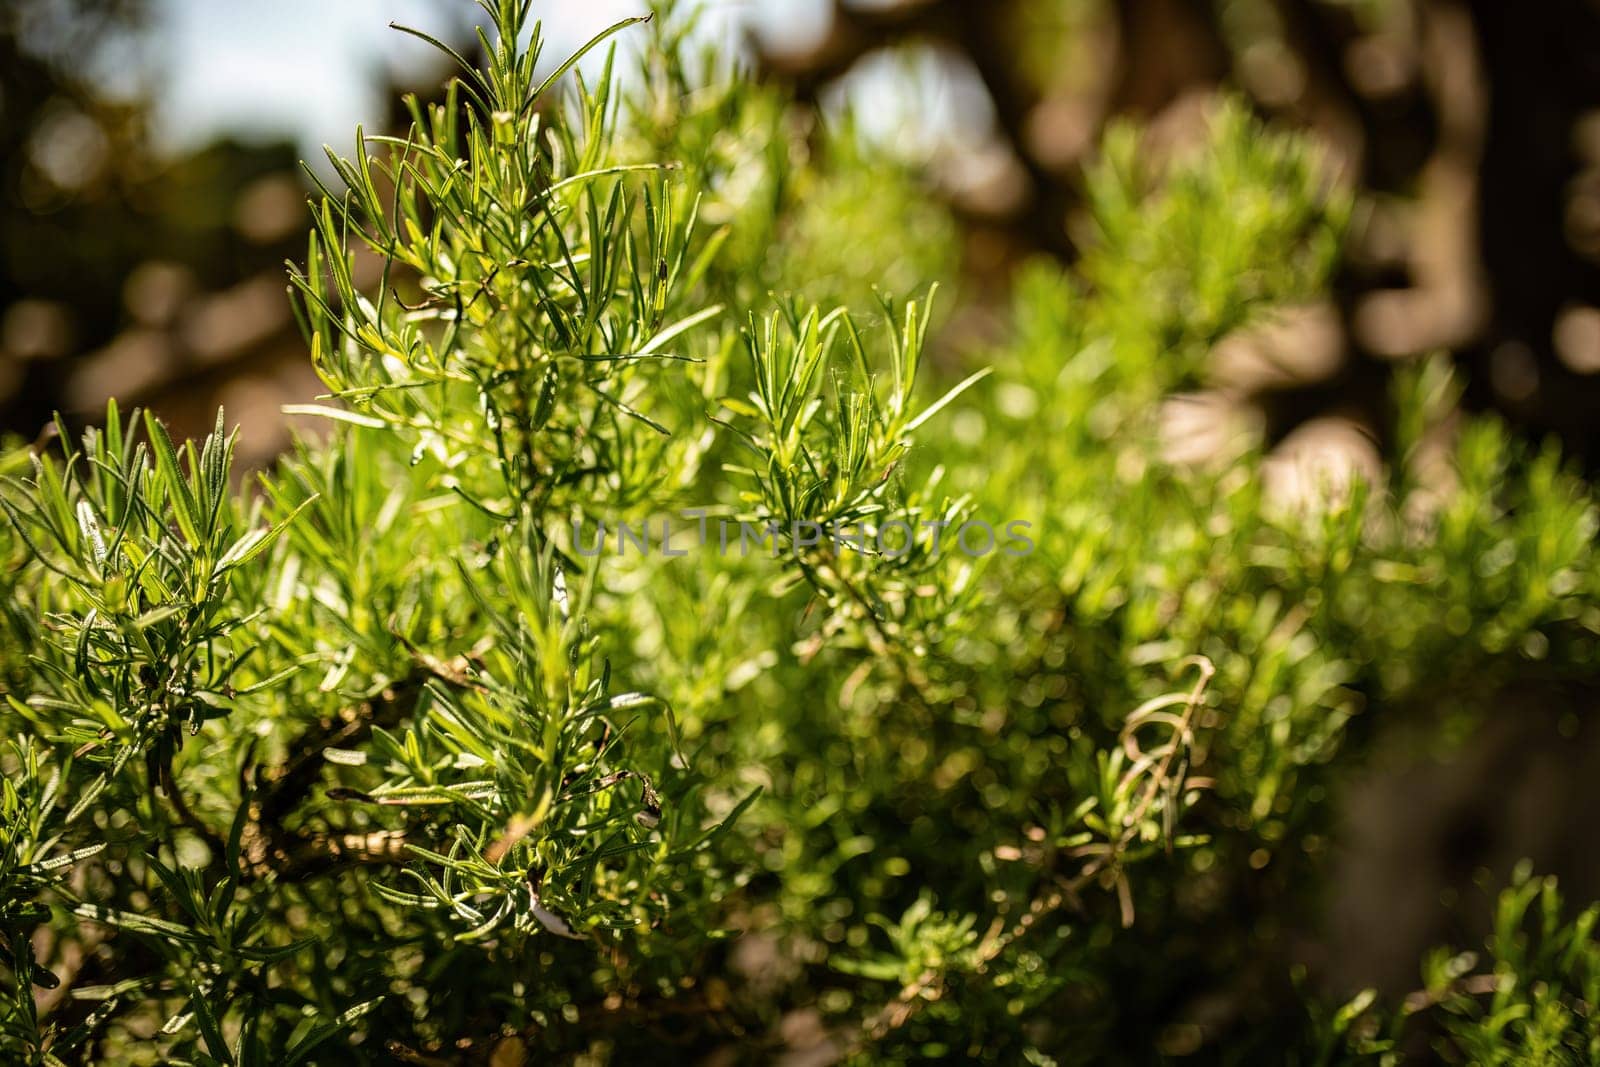 Lush rosemary leaves captured in their natural habitat, showcasing earthy green hues.